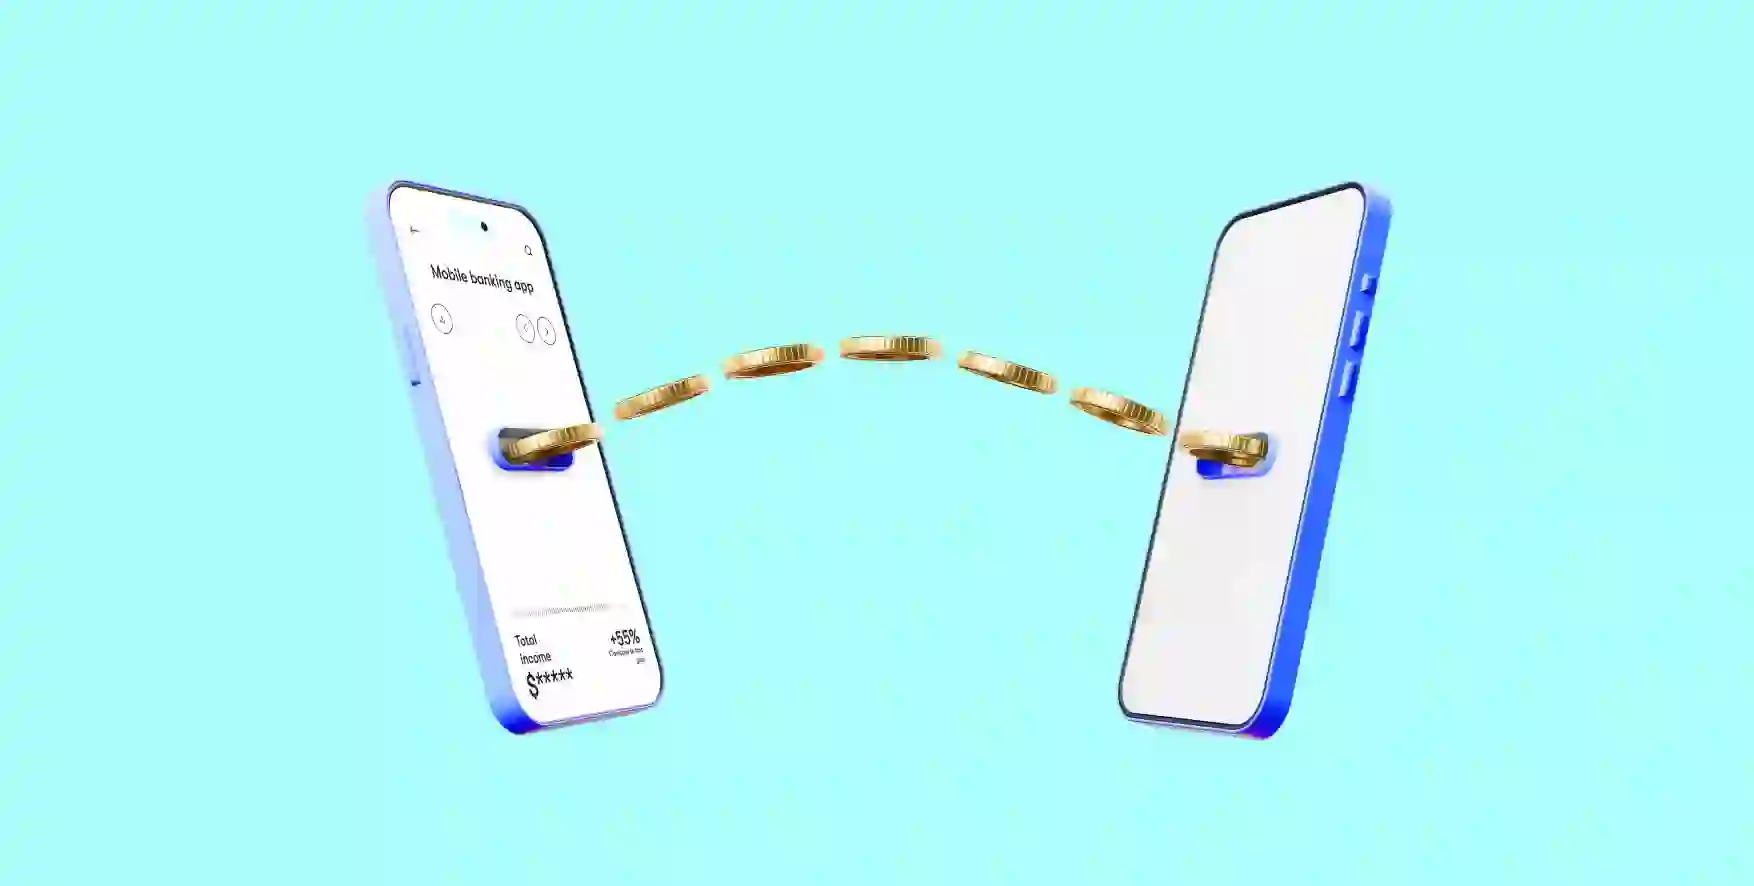 coins transfer from one phone to another